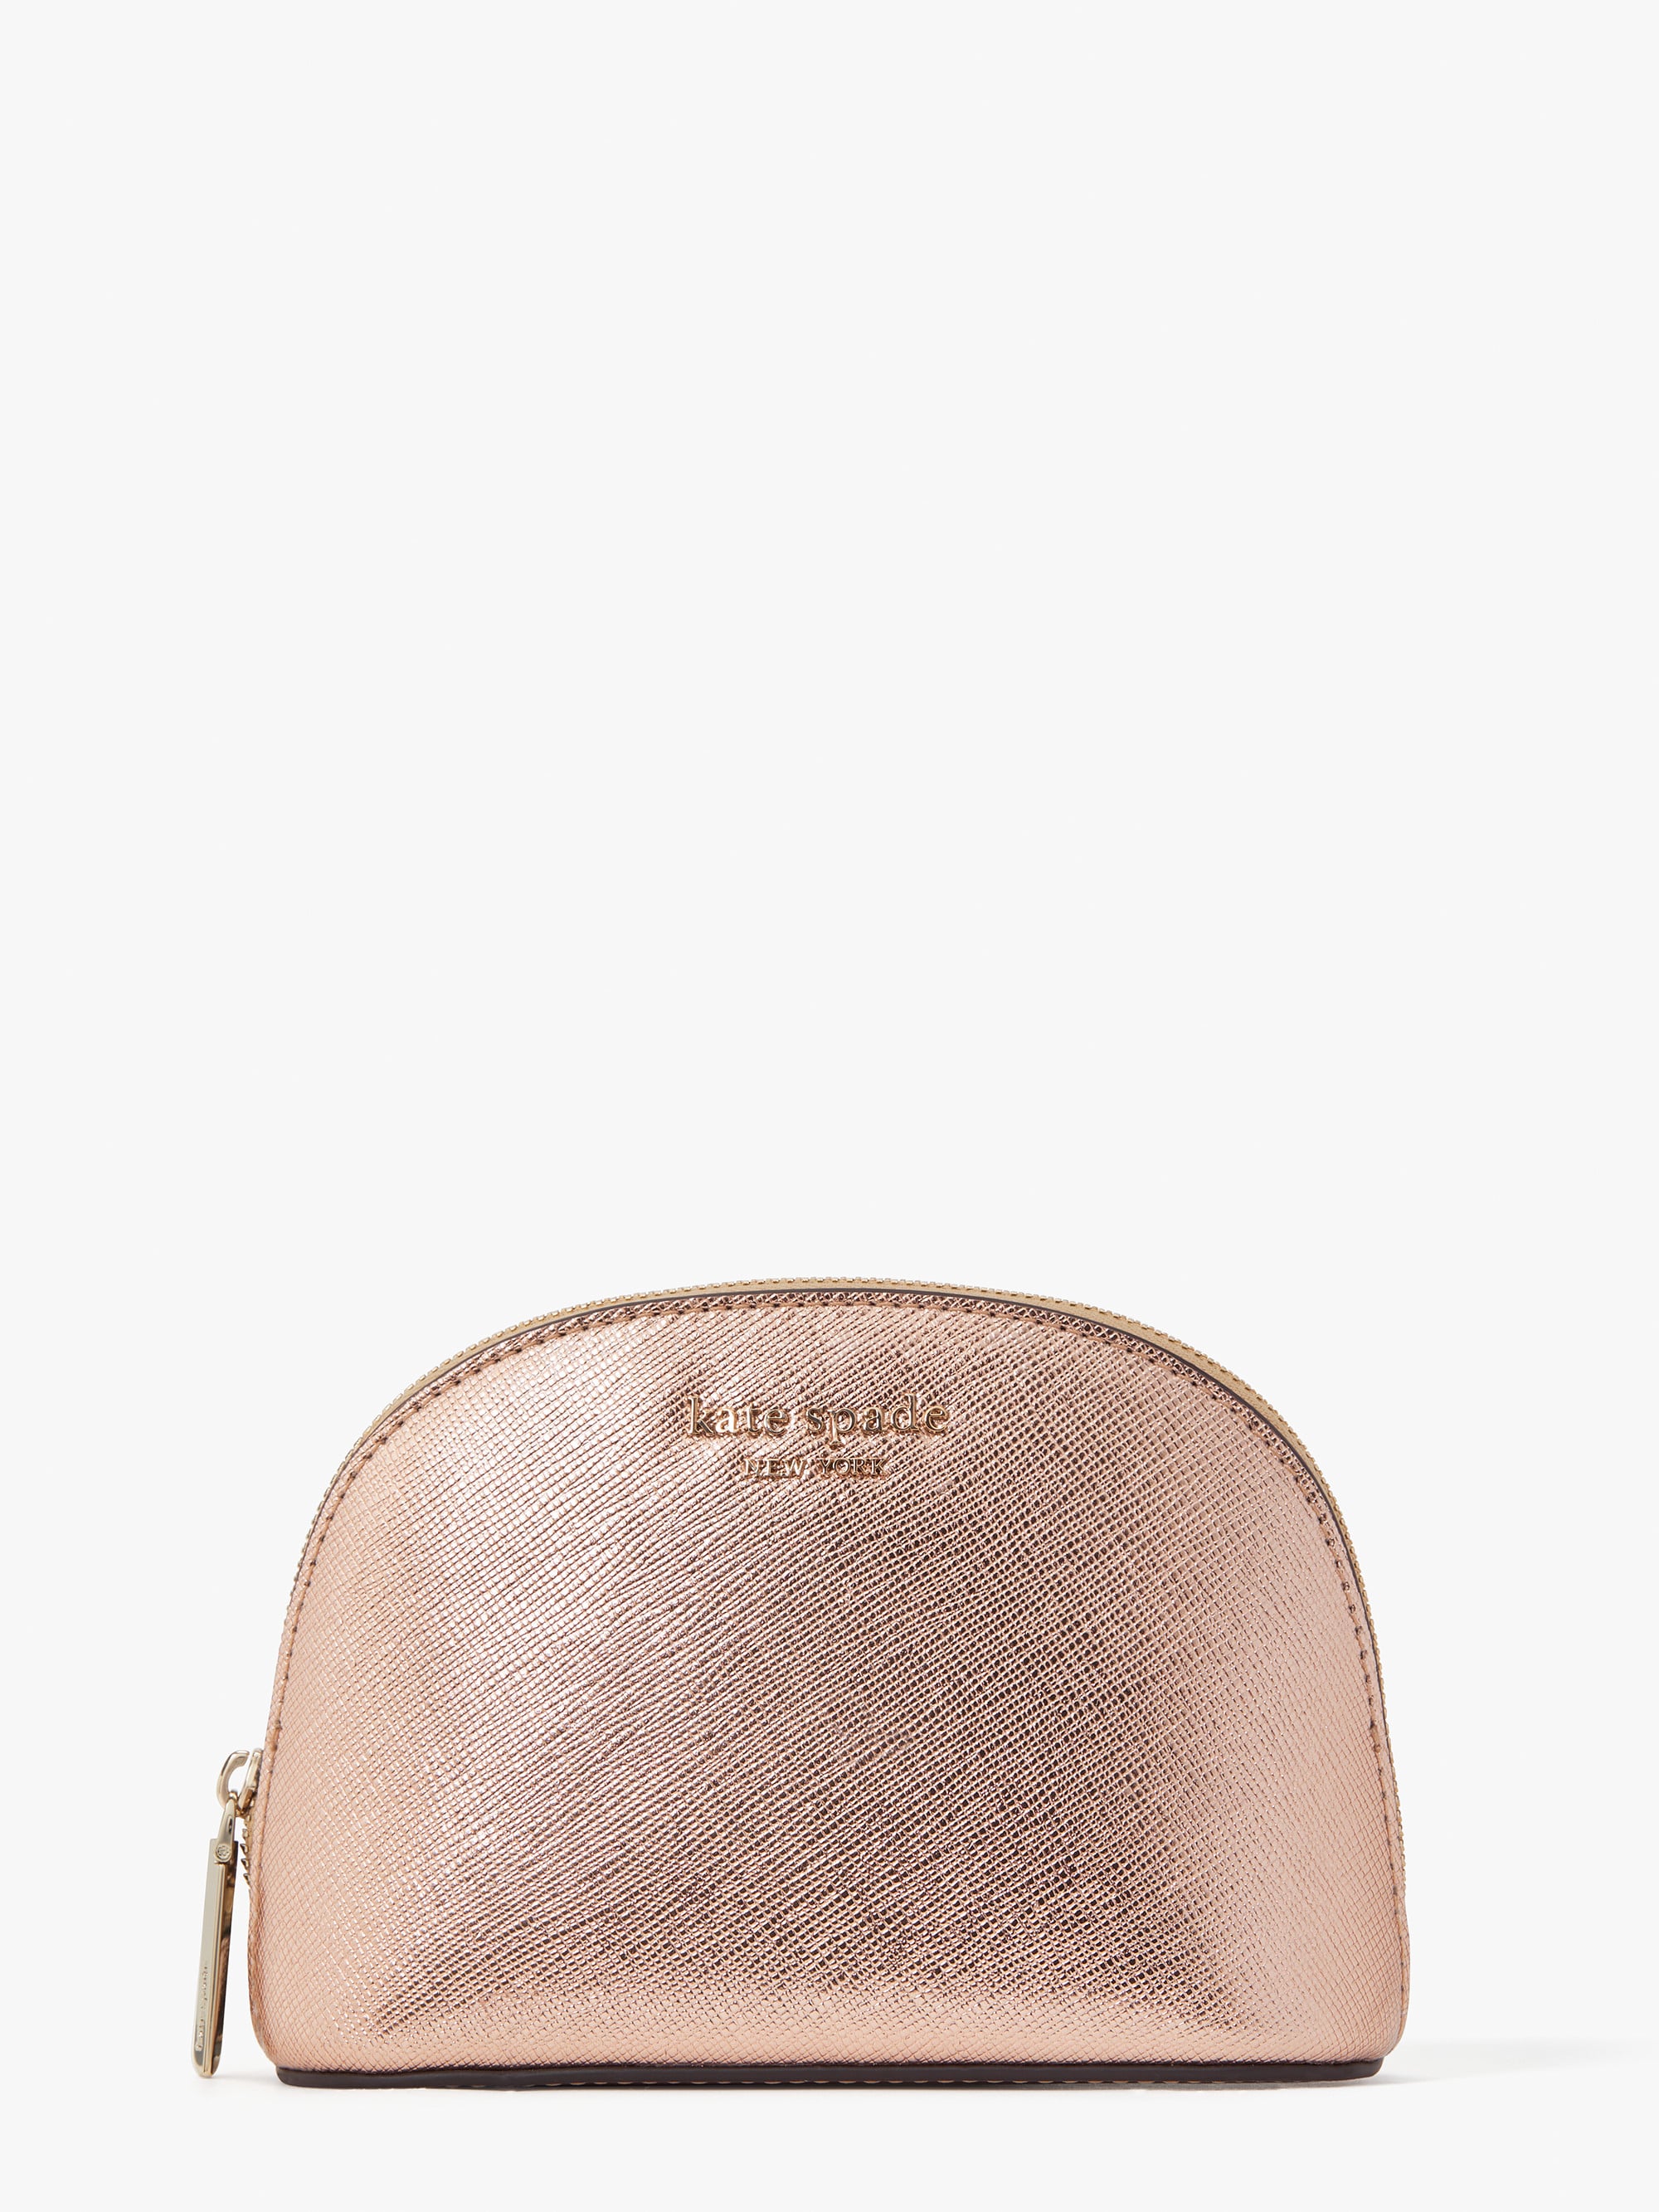 For Stylish Storage: Kate Spade Spence Dome Cosmetic Case | 21 Rose Gold  Gifts So Stunning, You'll Have a Hard Time Not Keeping Them to Yourself |  POPSUGAR Fashion Photo 8